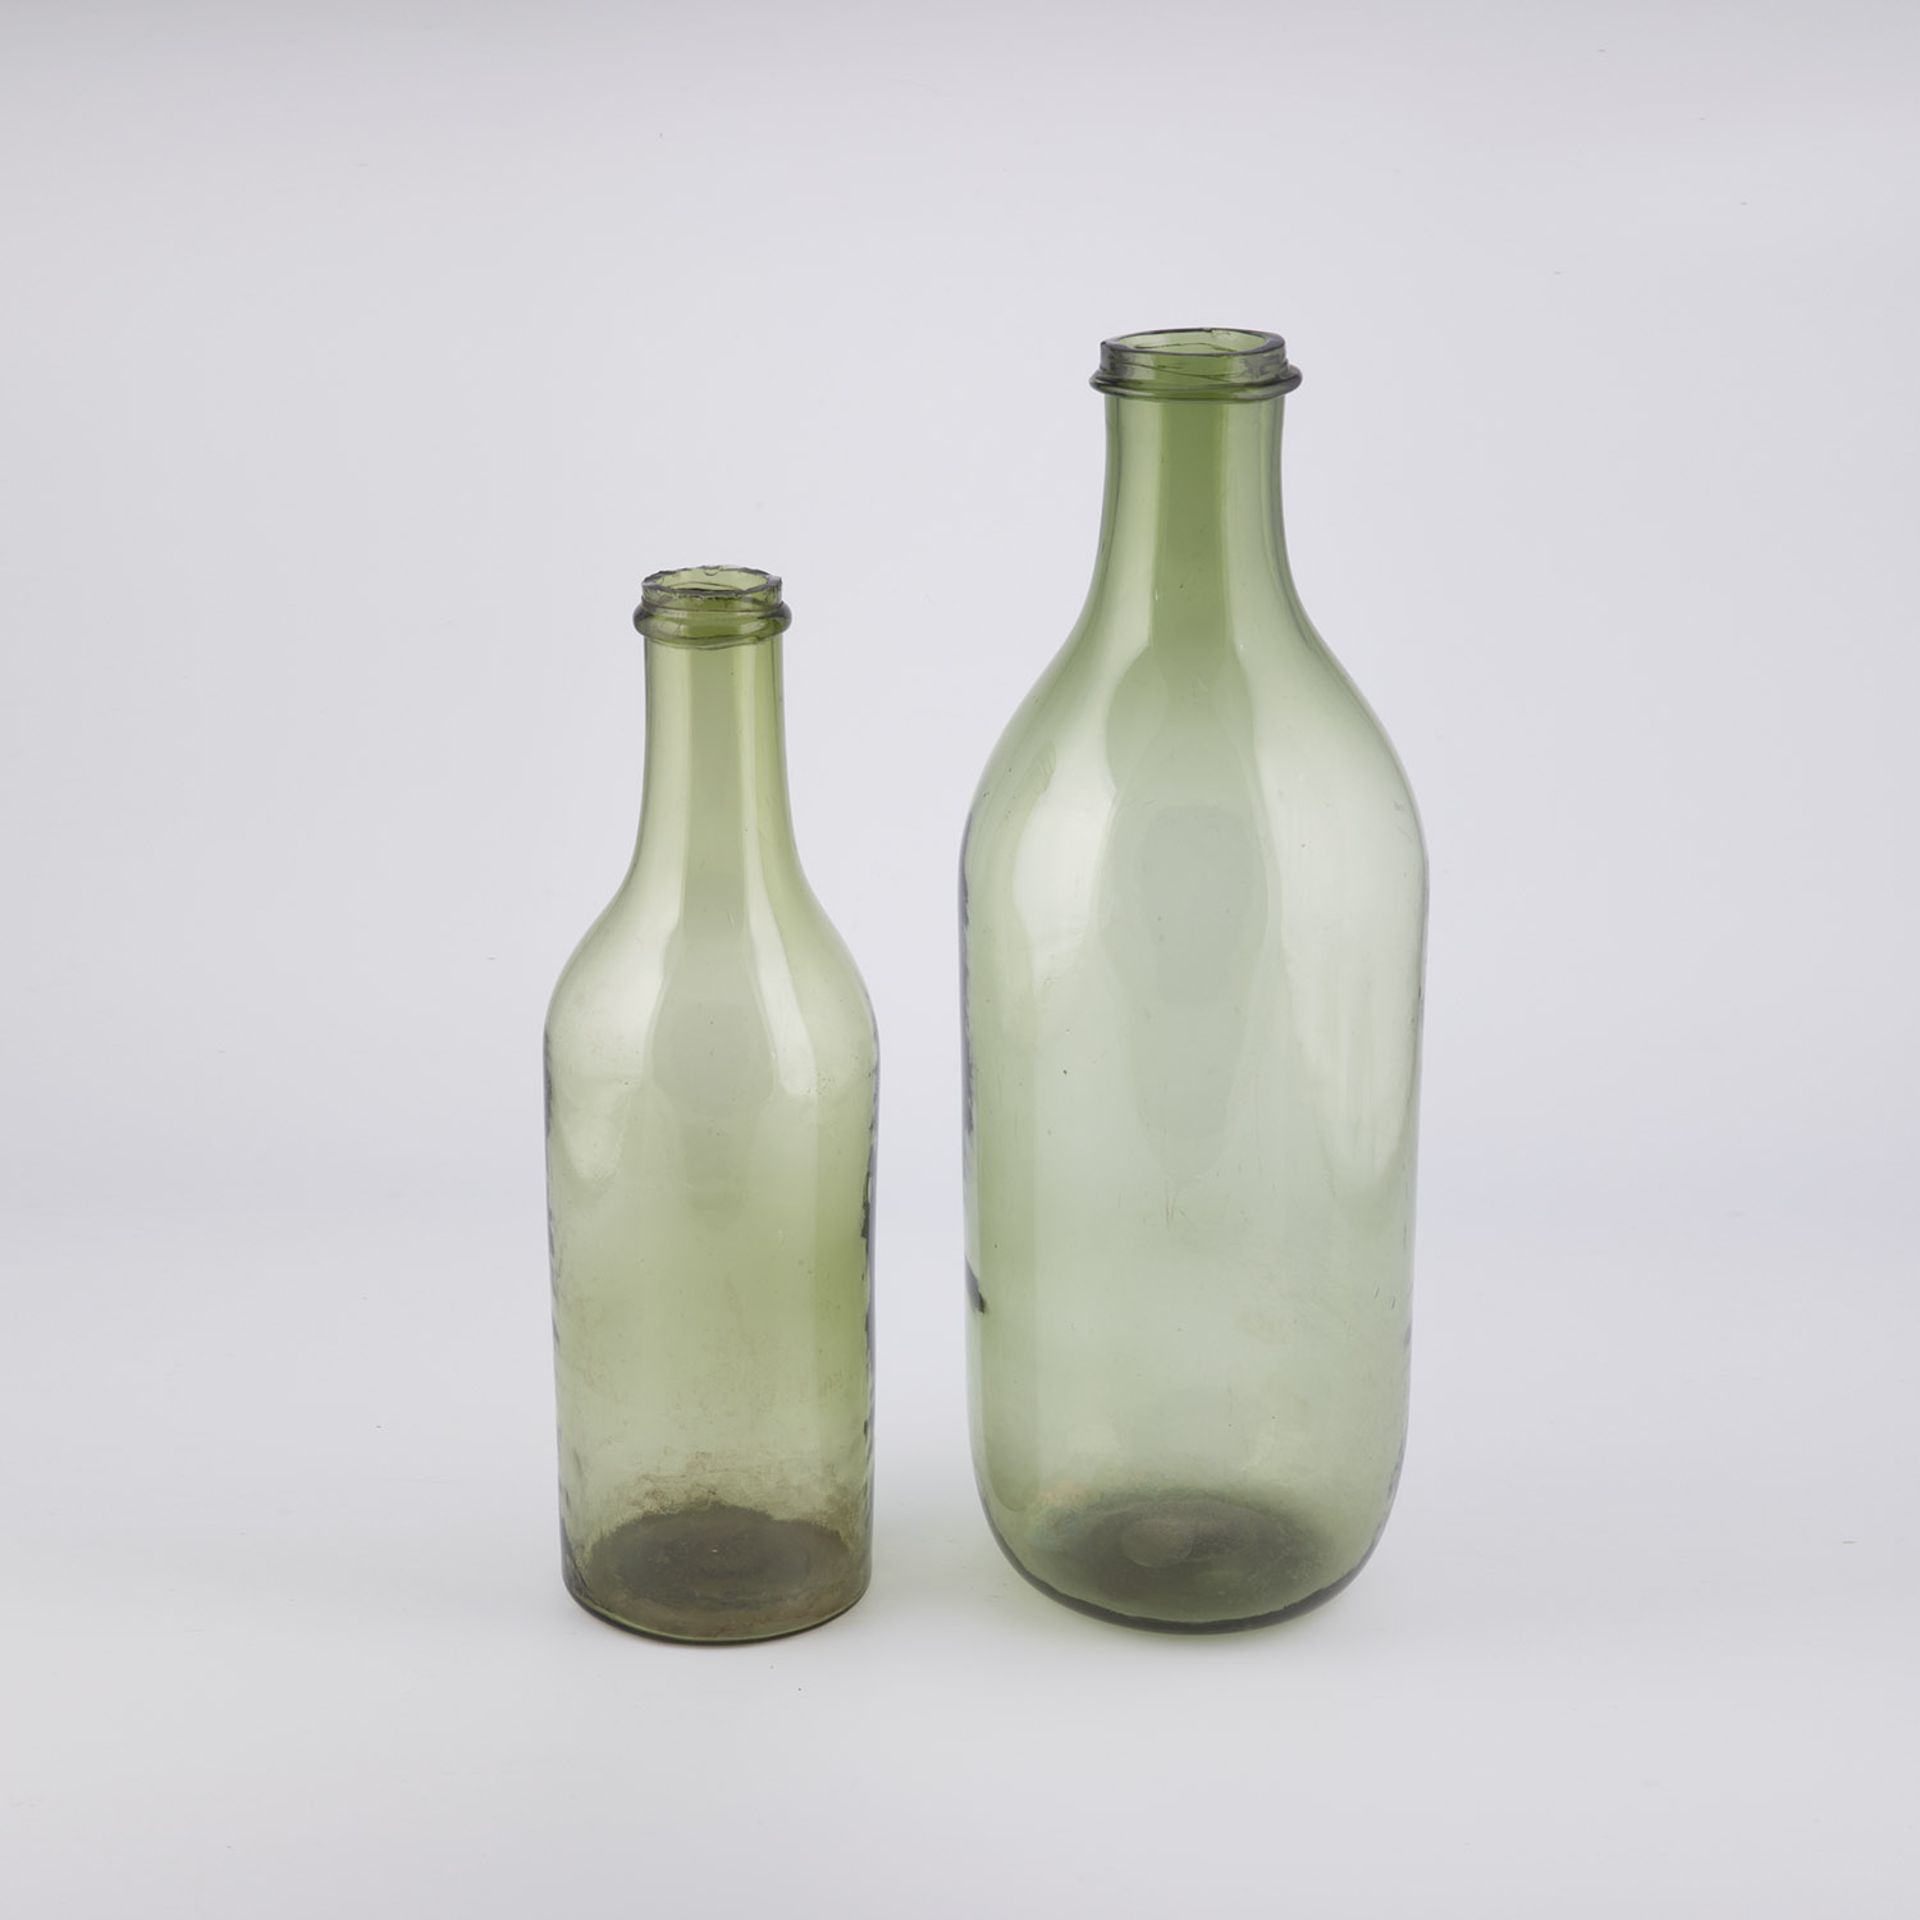 Two large storage bottles France, 19th century Transparent, strongly greenish glass with a flat